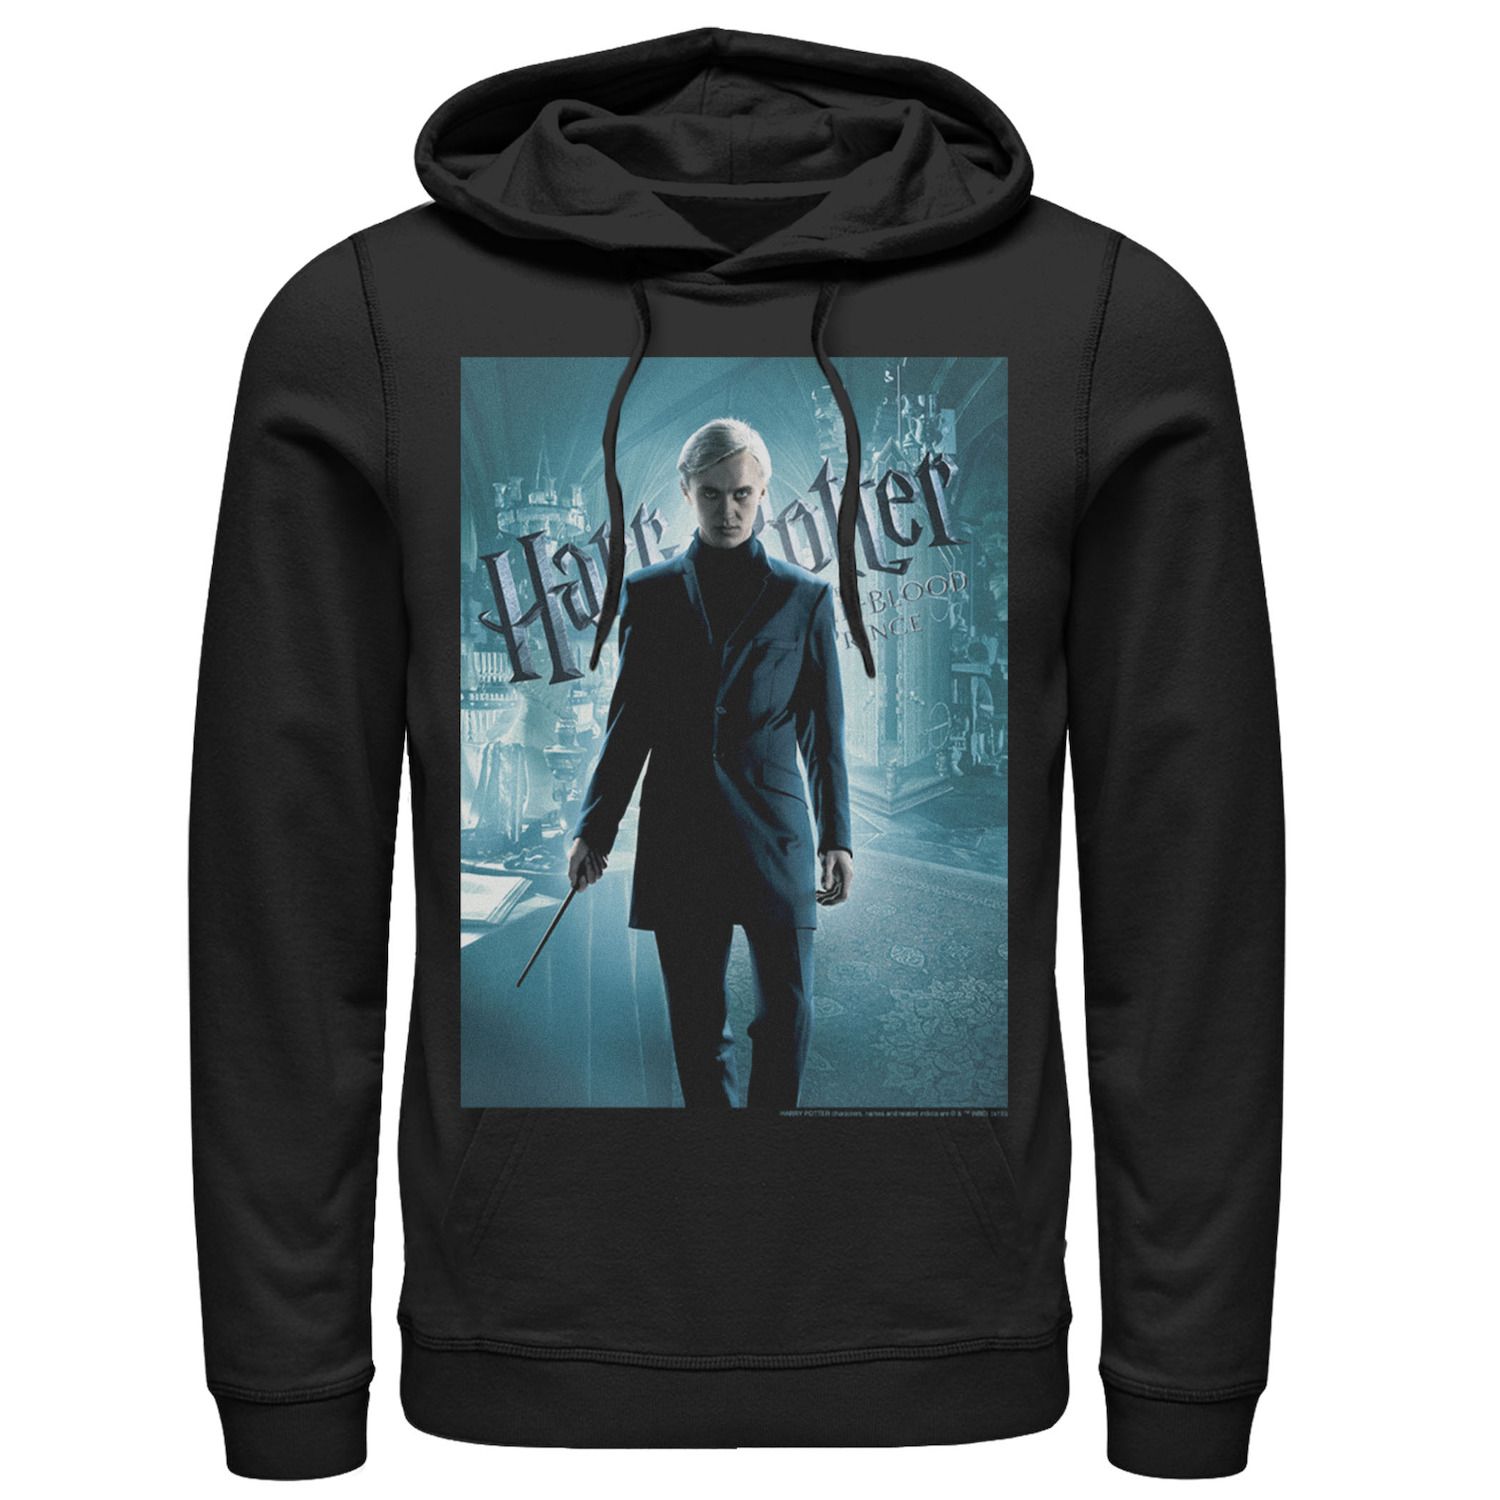 Image for Harry Potter Men's Half-Blood Prince Draco Malfoy Character Poster Graphic Pullover Hoodie at Kohl's.